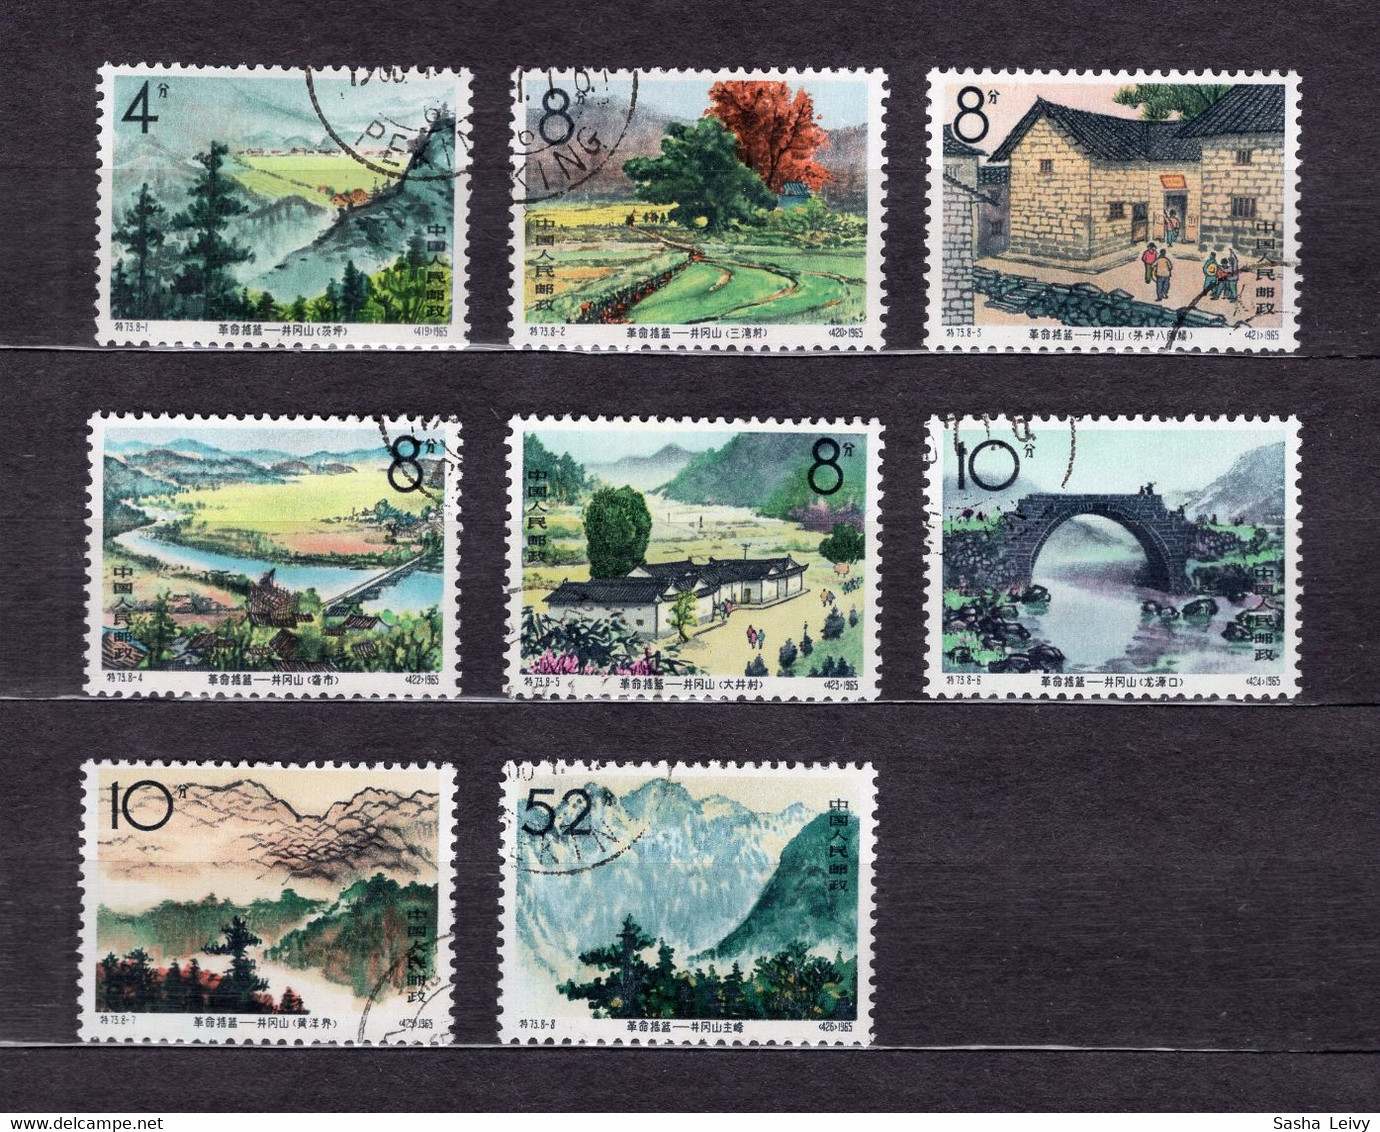 China PR 1965 Mi# 874-881 Jinggangshan Mountains-Cradle Of The Chinese Revolution -used (46x5) - Used Stamps